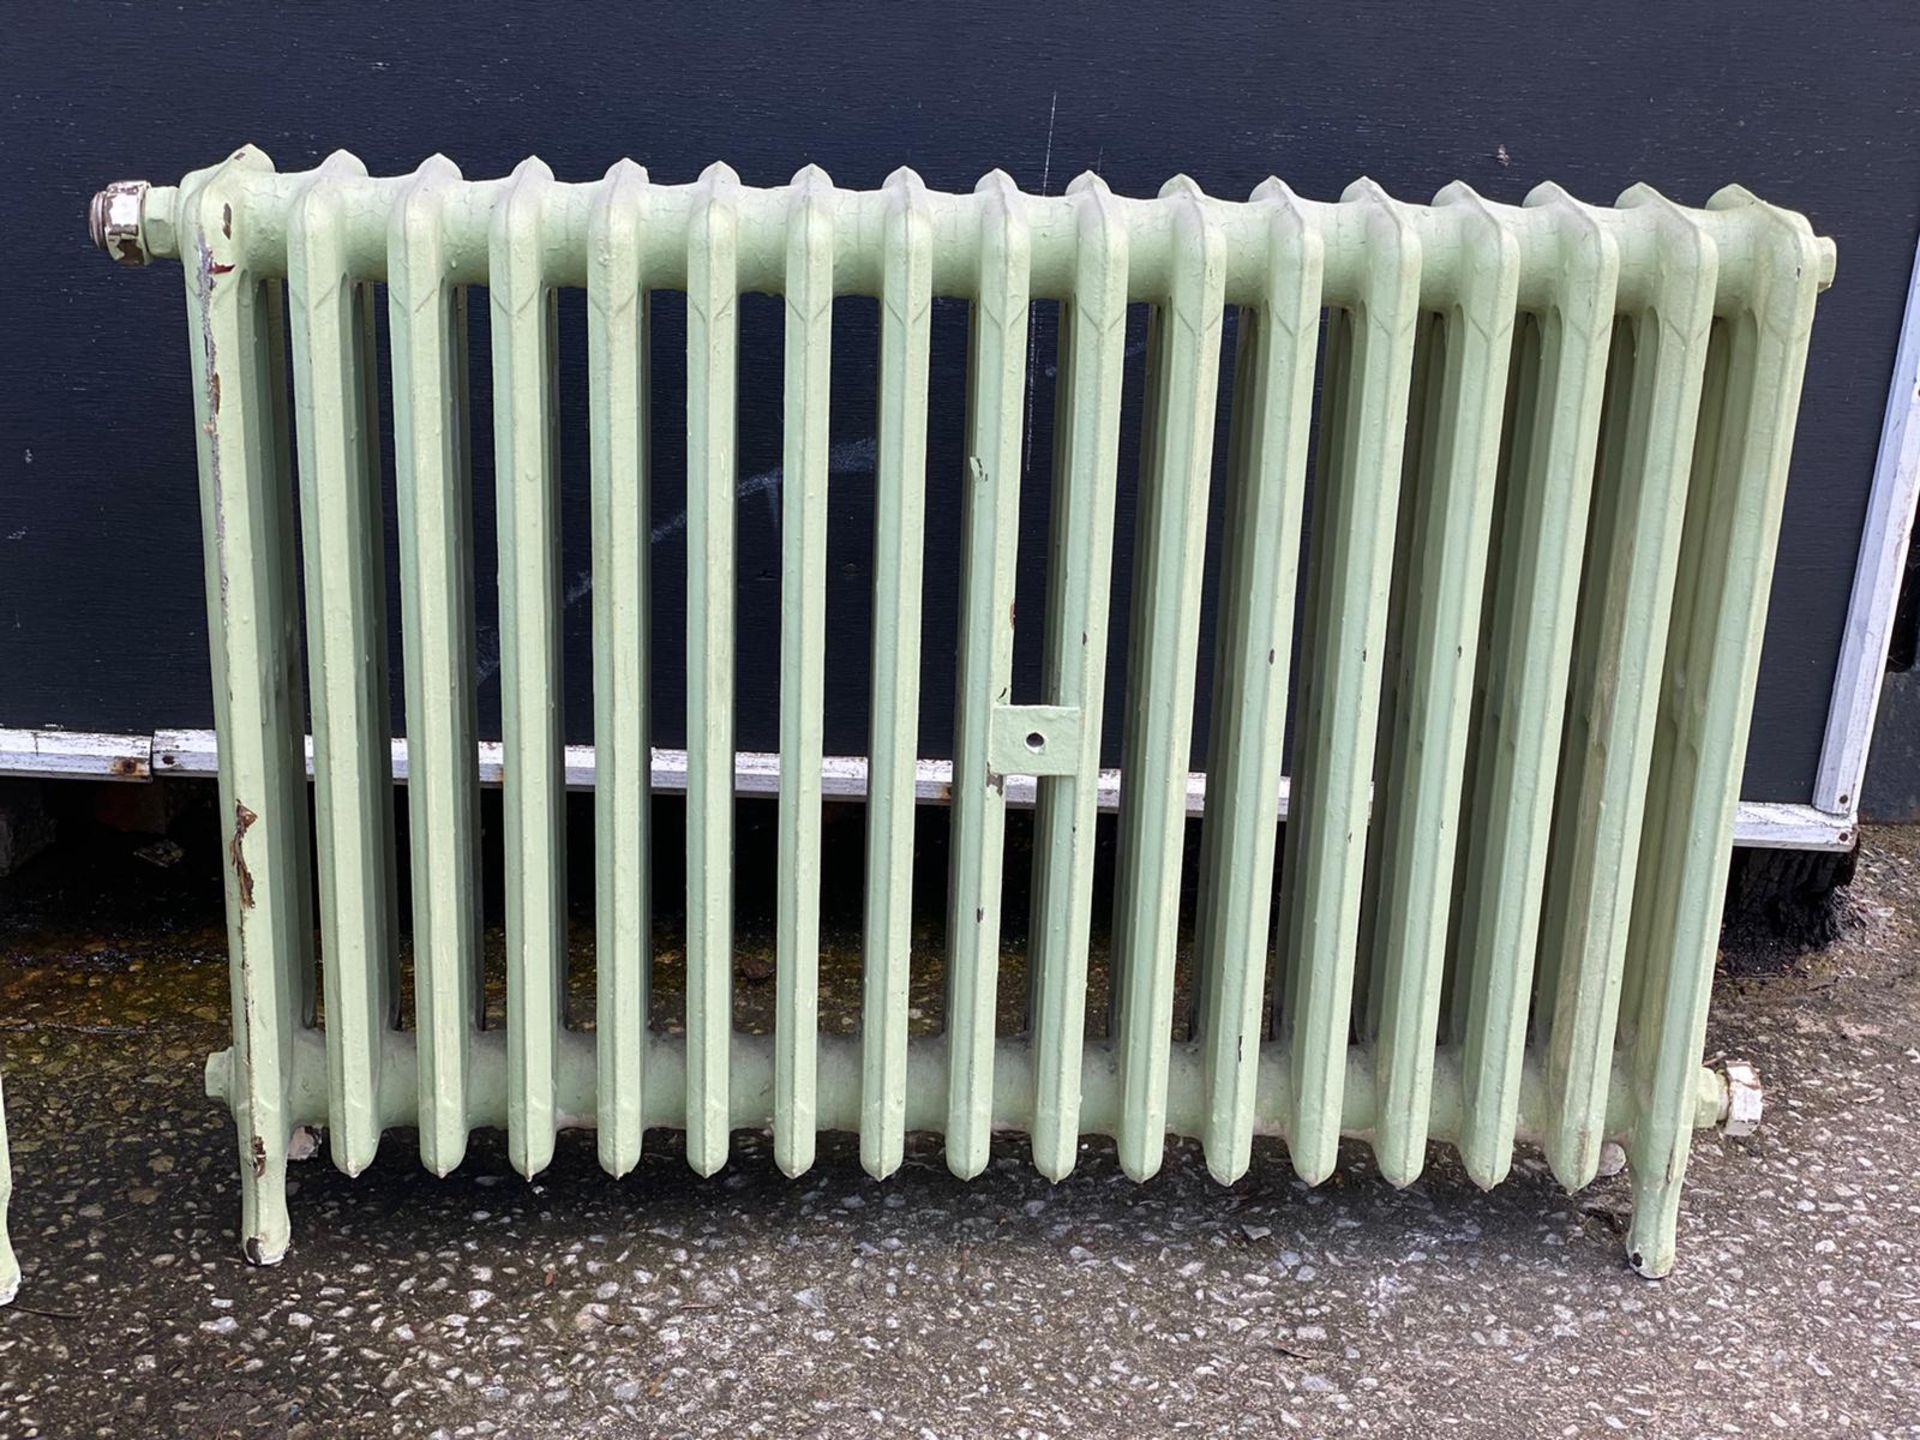 Pair of 4-column classic Wicket Radiators, 900mm wide x 600mm tall, 17 fins - Image 2 of 6